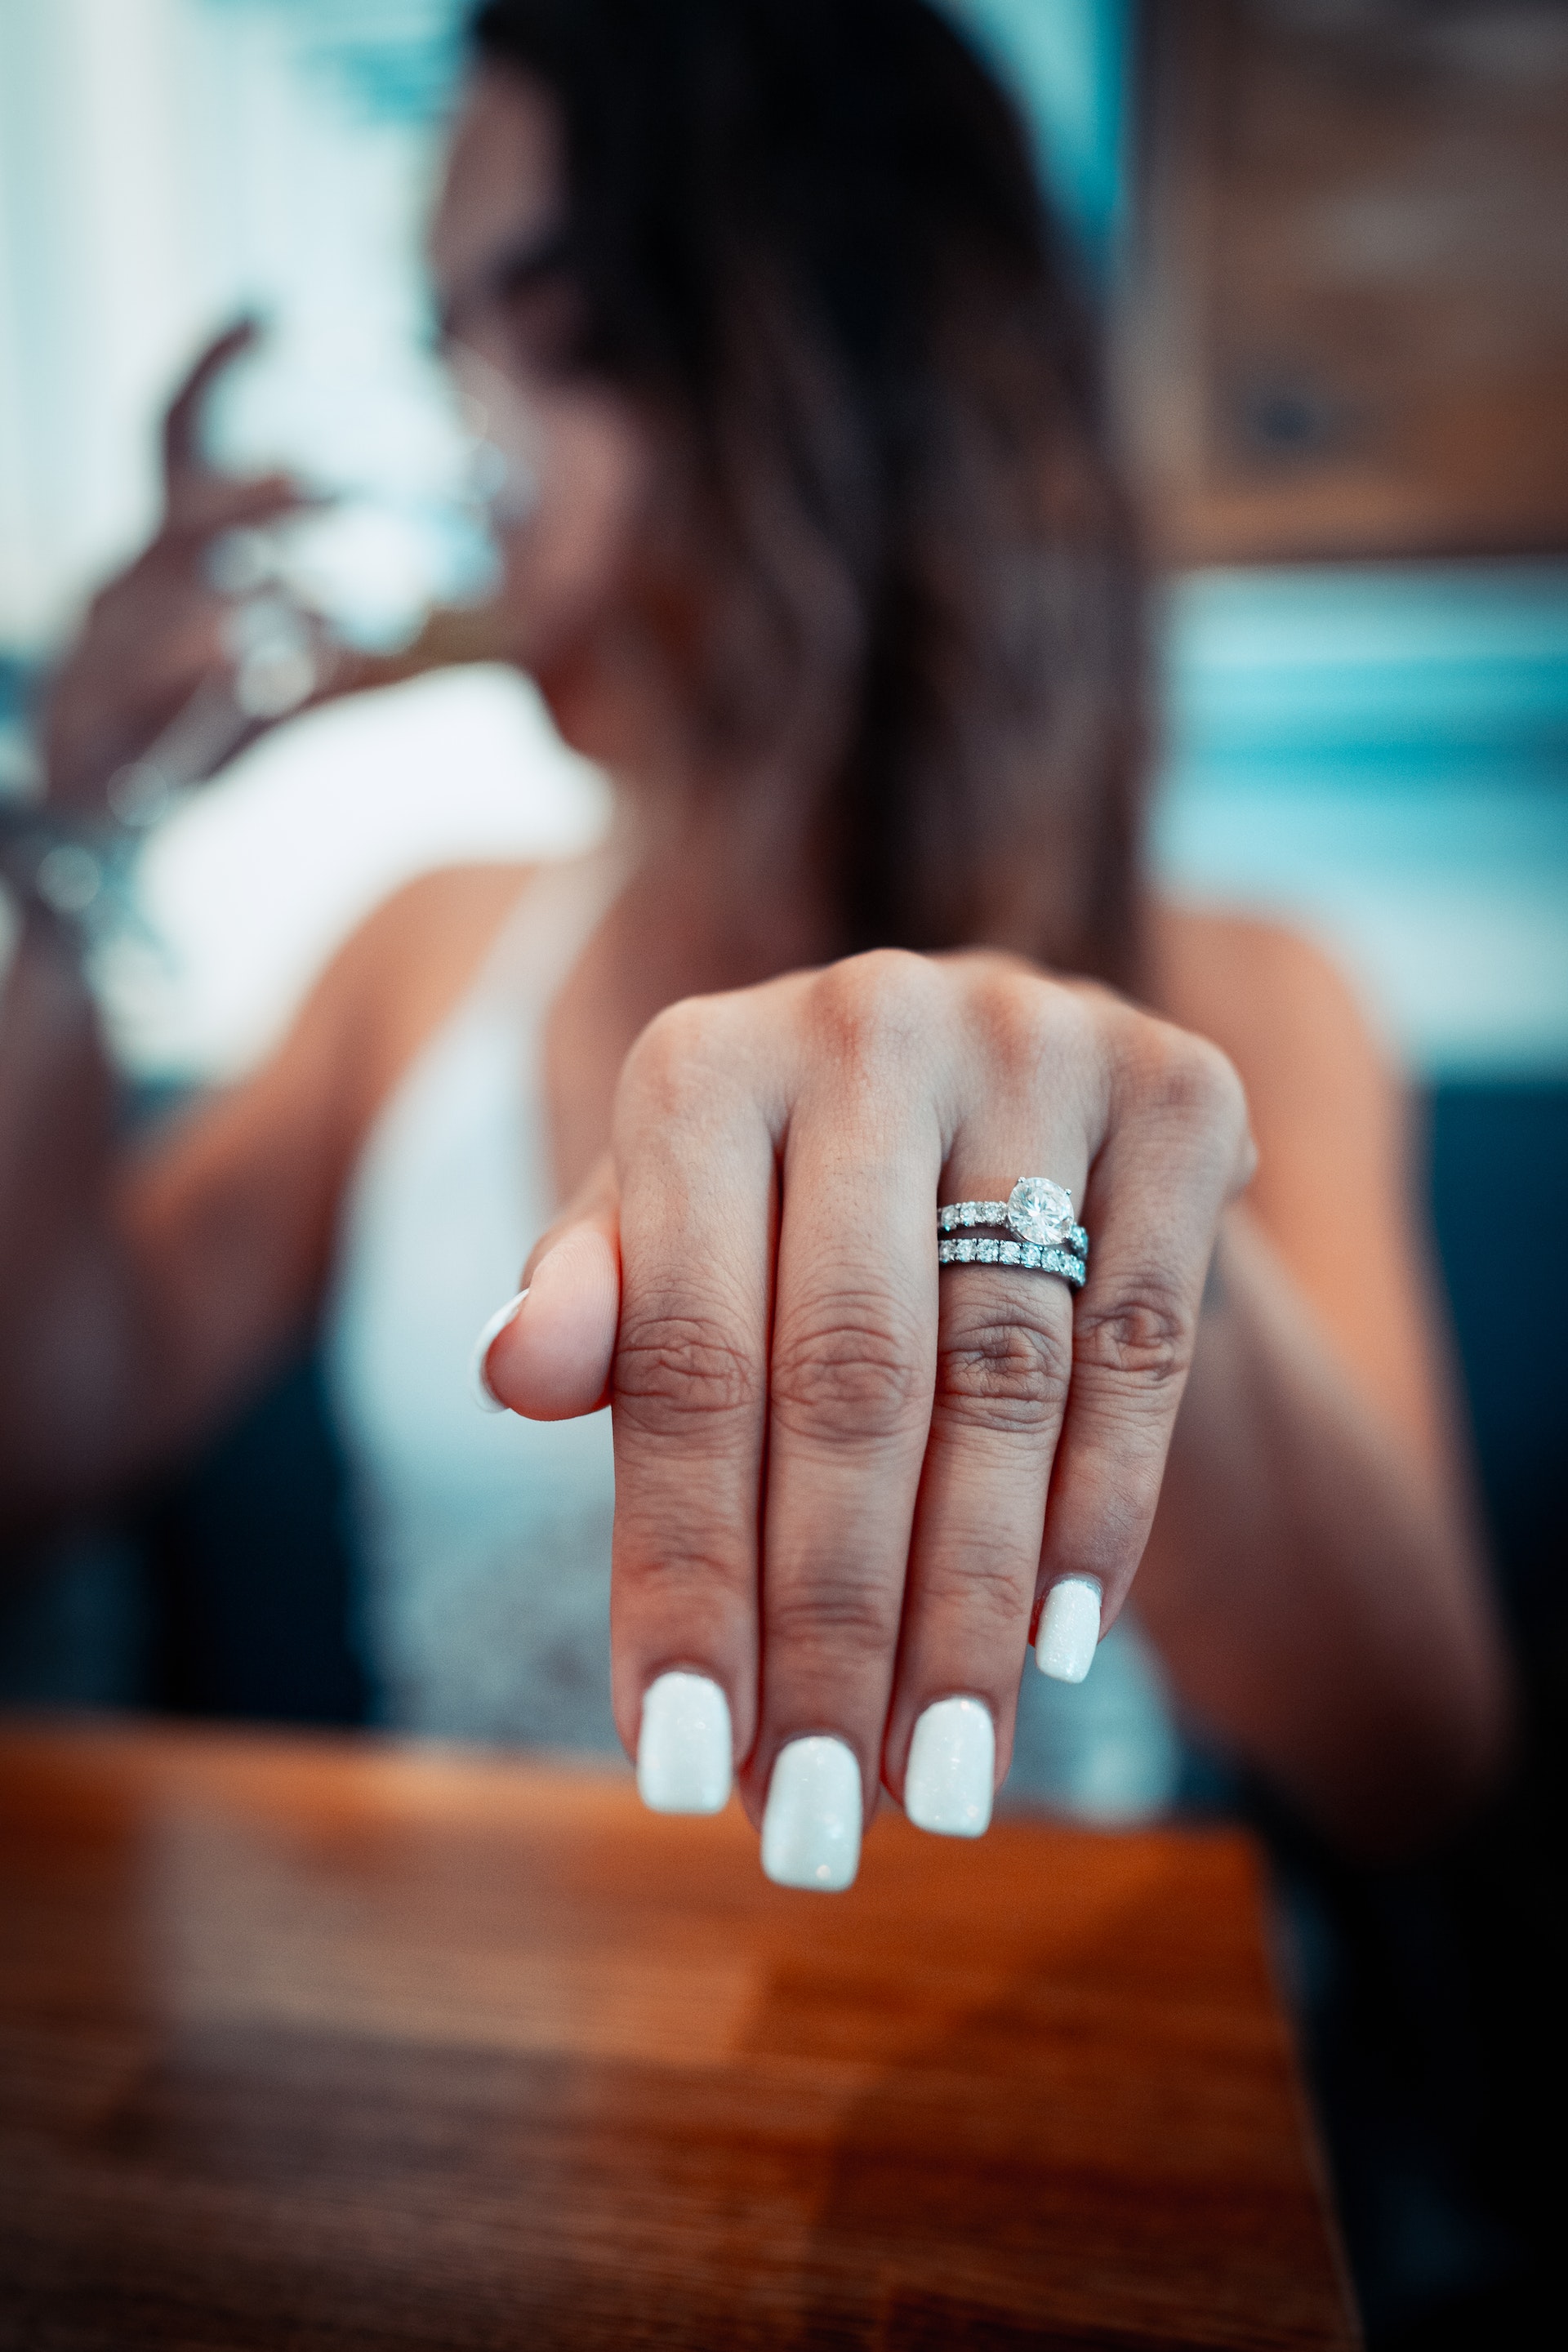 A woman wearing white nail polish flaunting her ring | Source: Pexels